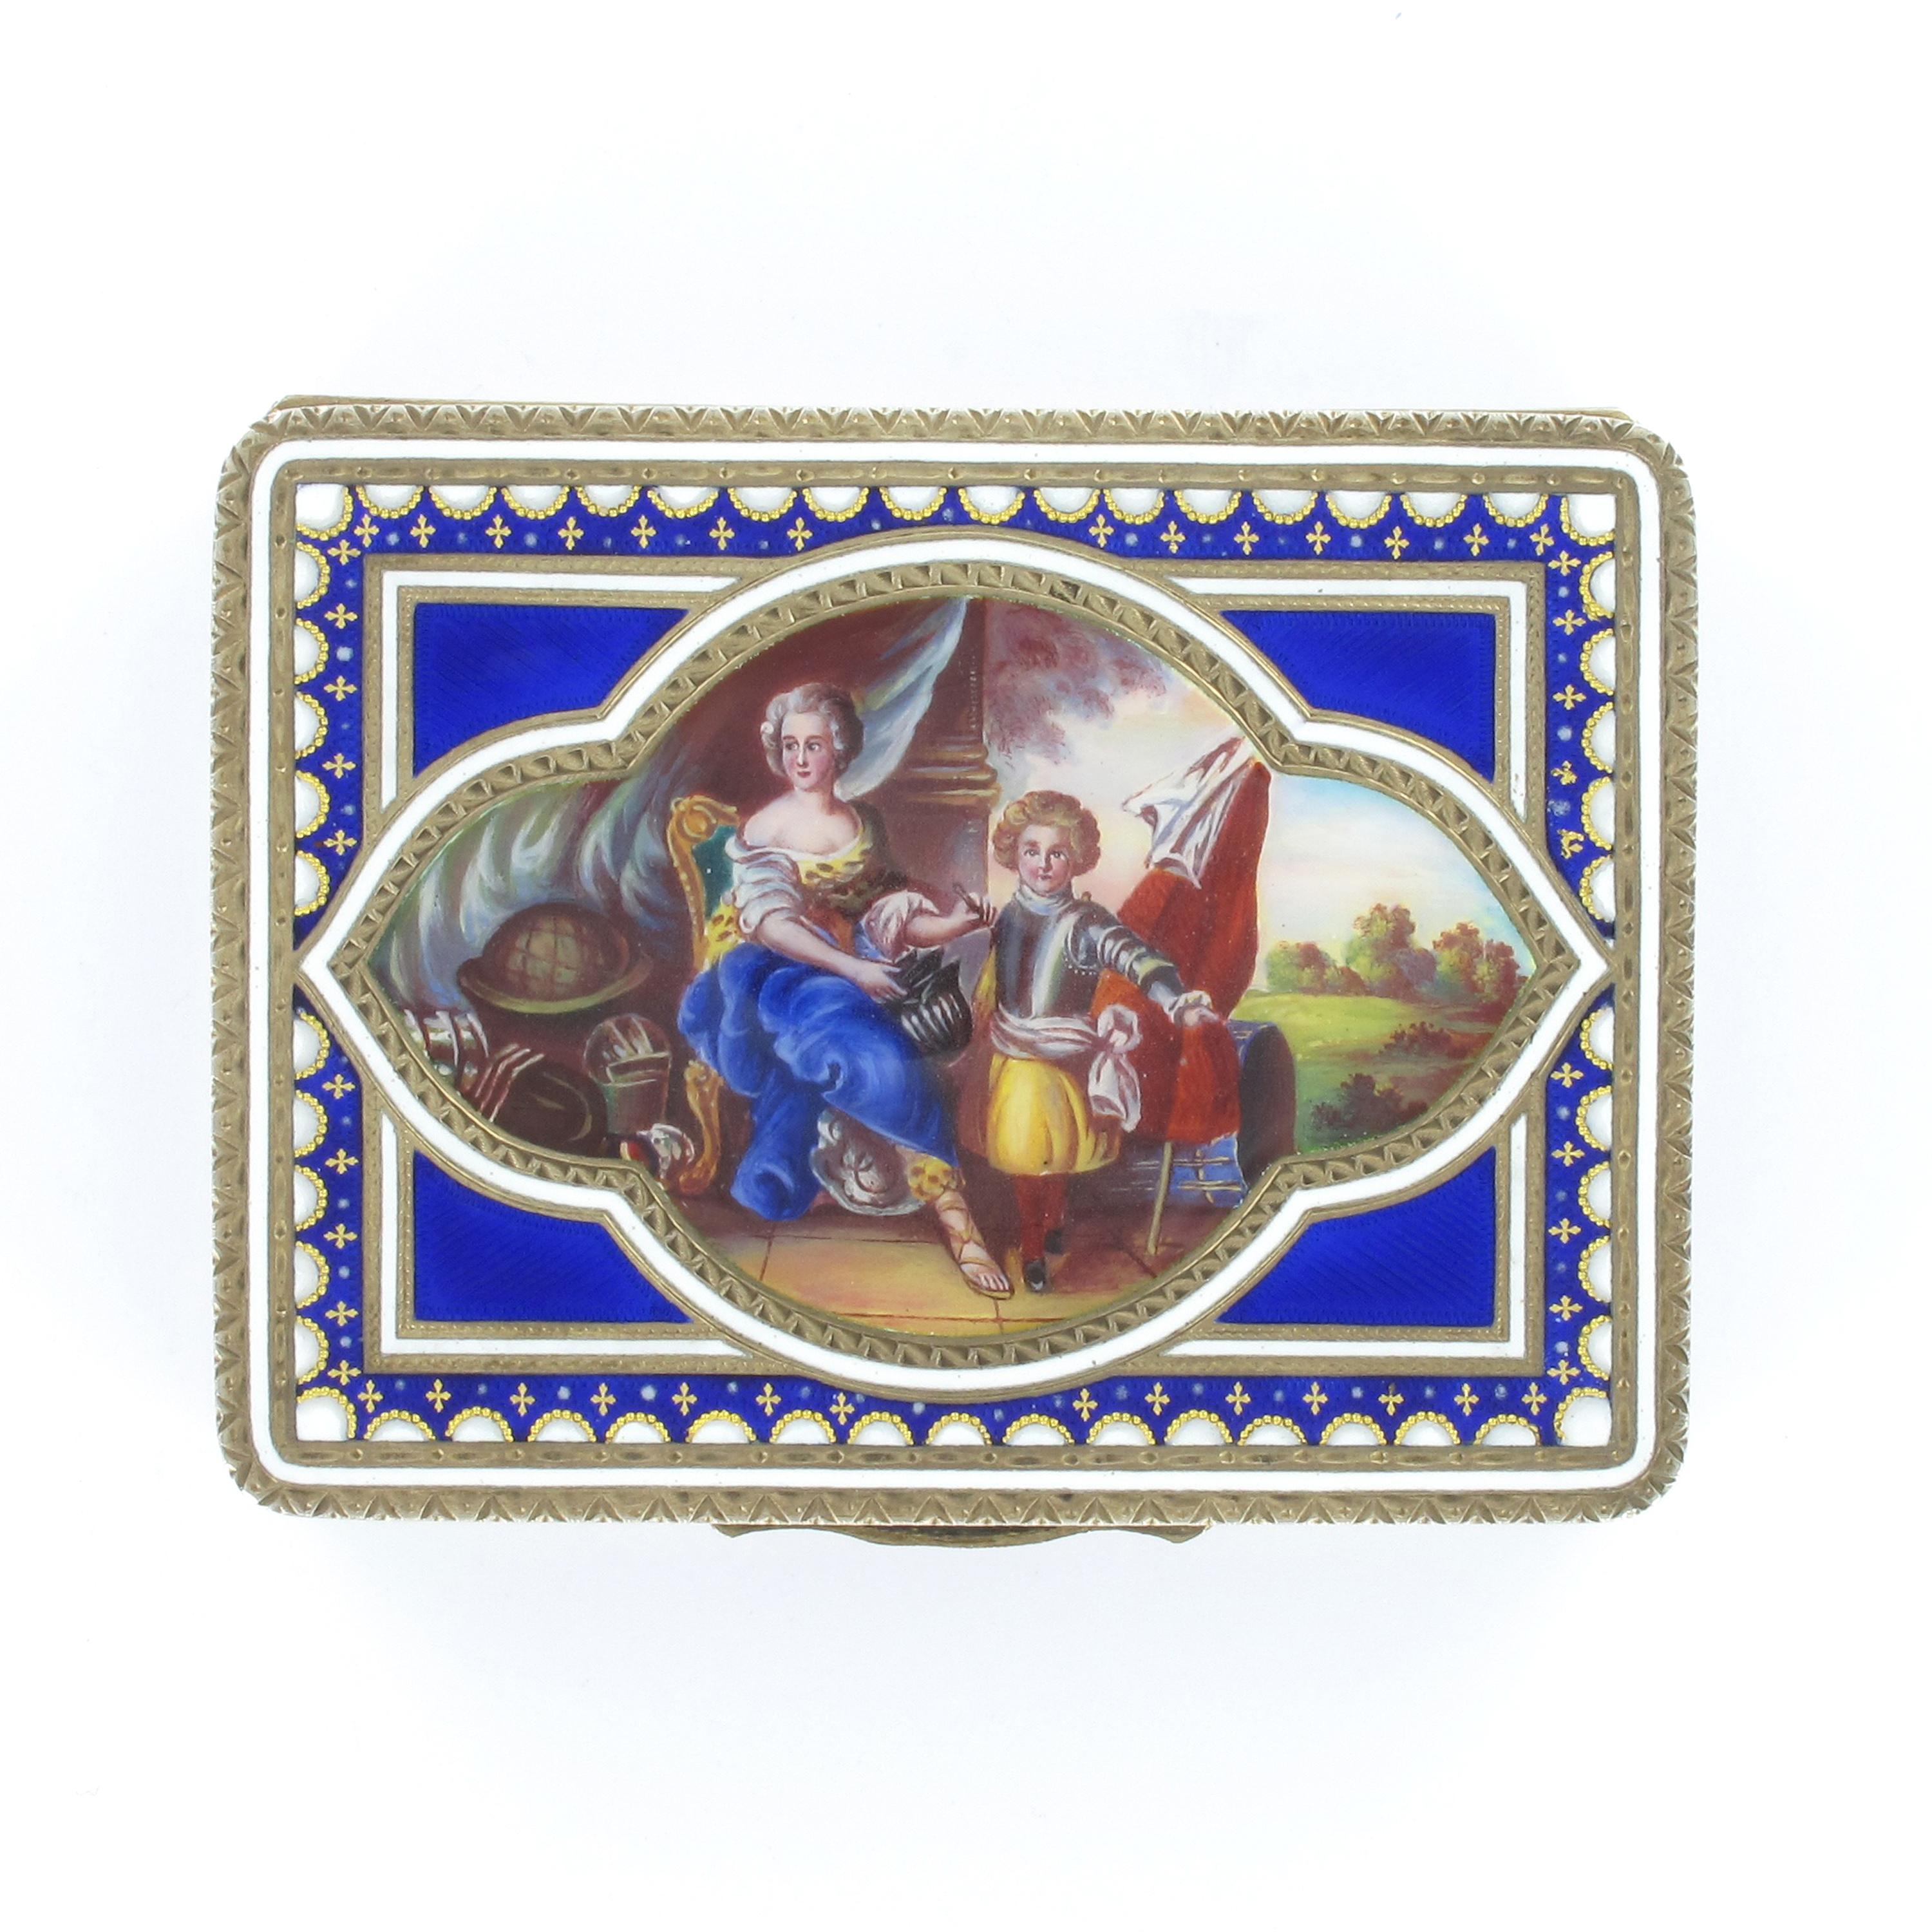 Finely enameled box in sterling silver 925. The inside is gilded with yellow gold 750. Maker's mark GS, hallmark 925 for sterling silver. The box is in excellent condition - abosolutely no damages on the enamel work.

Dimensions: 7.8 x 5.9 cm / 3.07